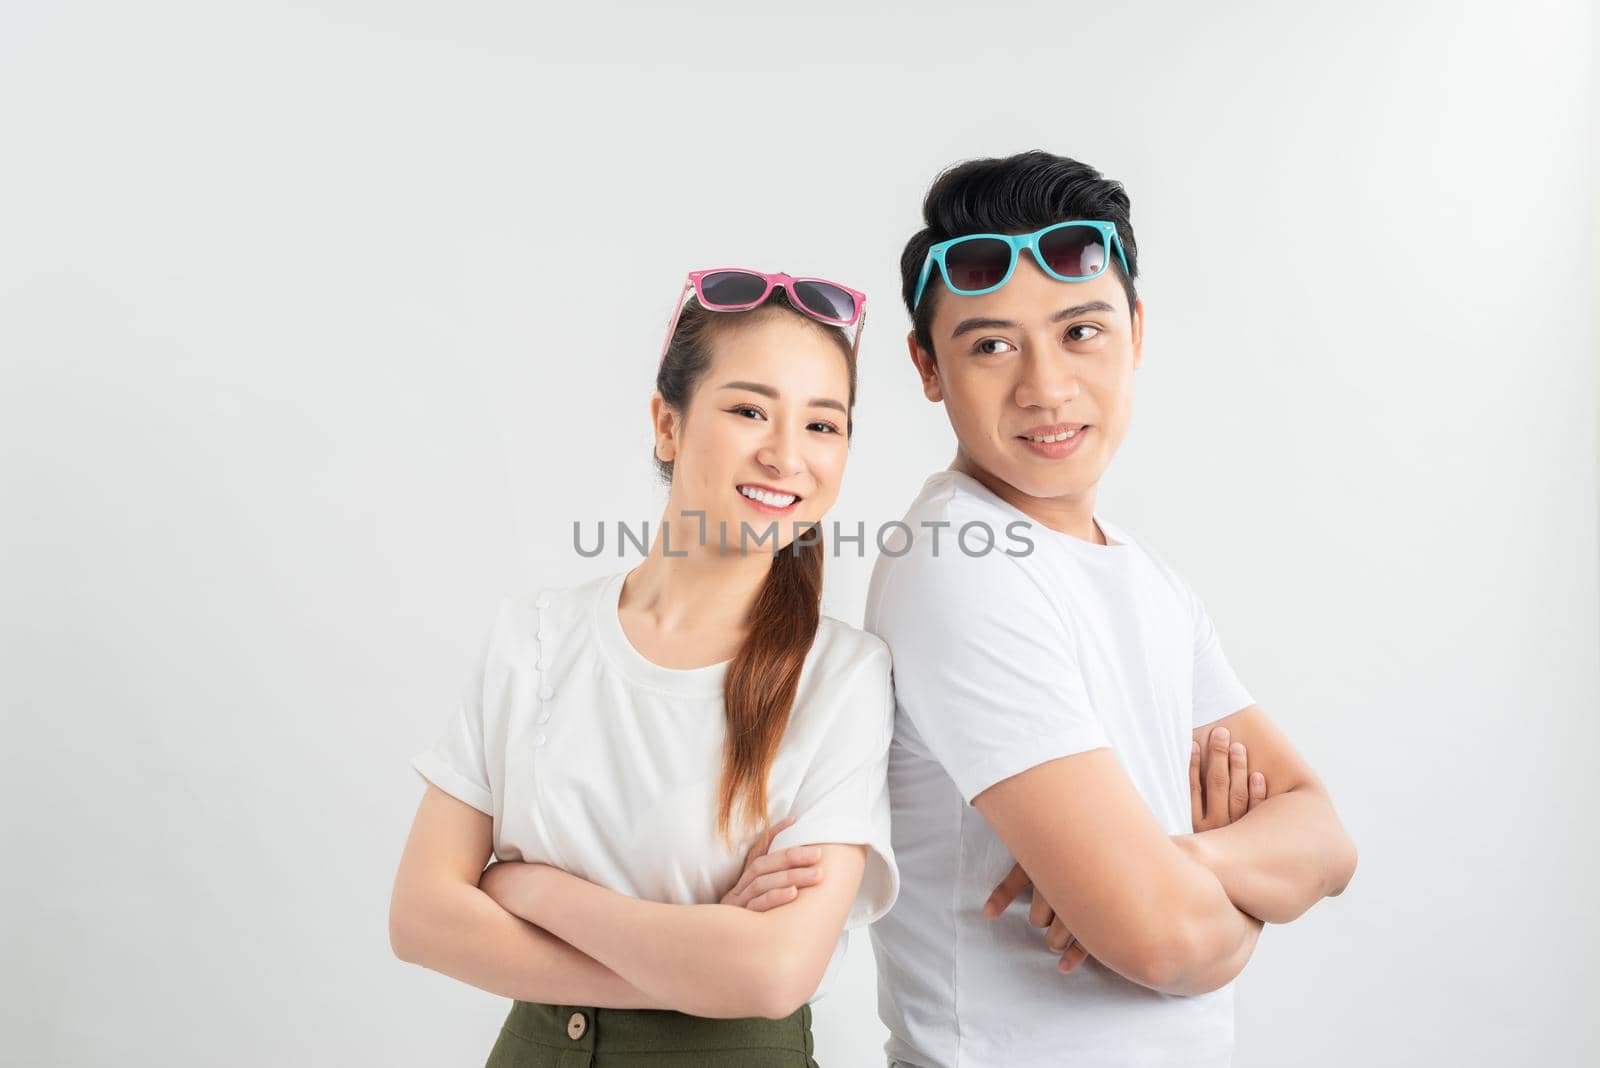 emotions and people concept - portrait of happy couple in white t-shirts celebrating success over white background